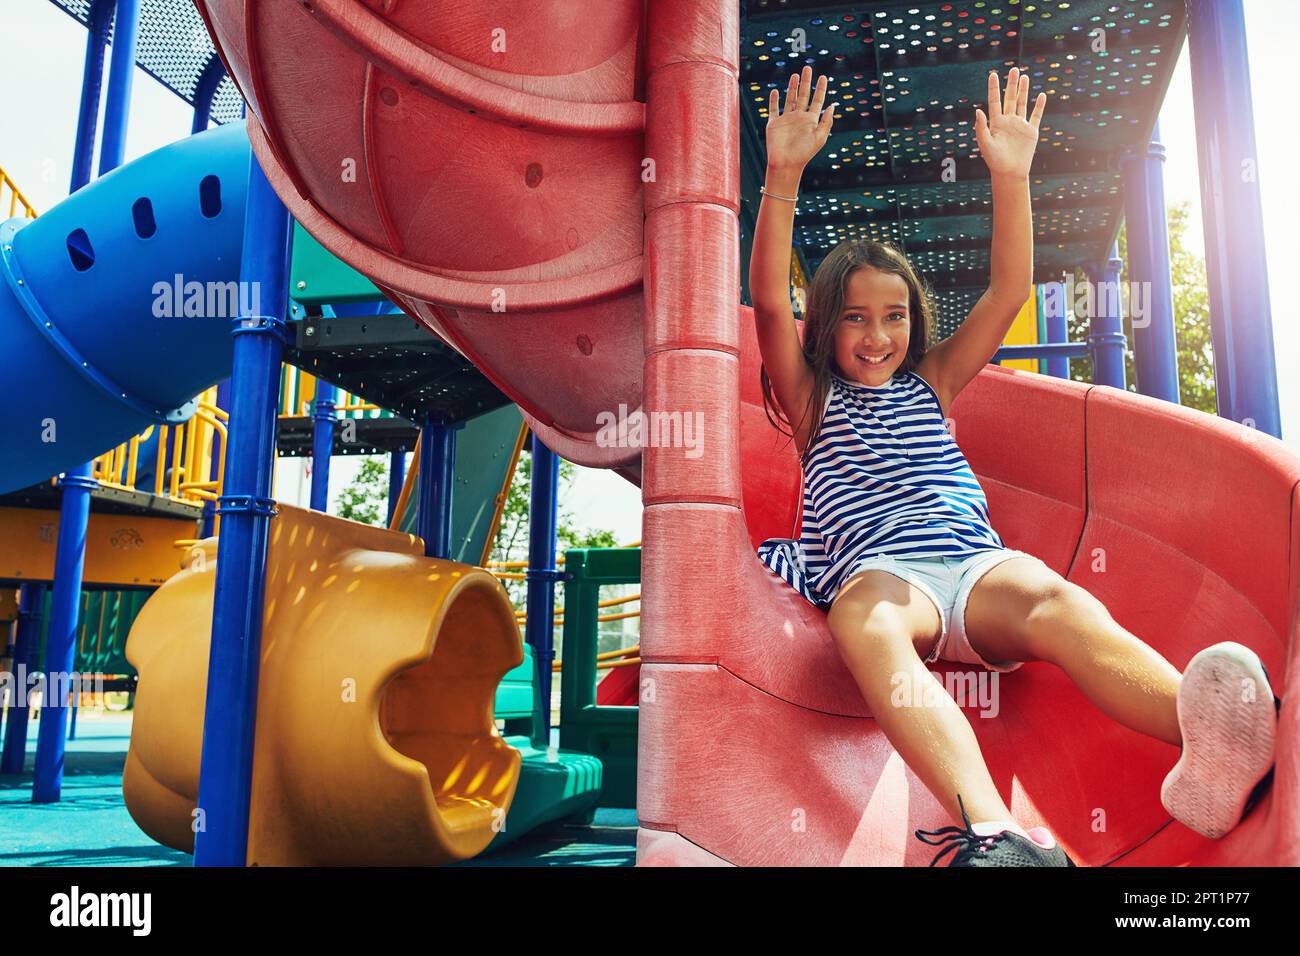 Sliding into the fun. a young girl sliding down the slide on a